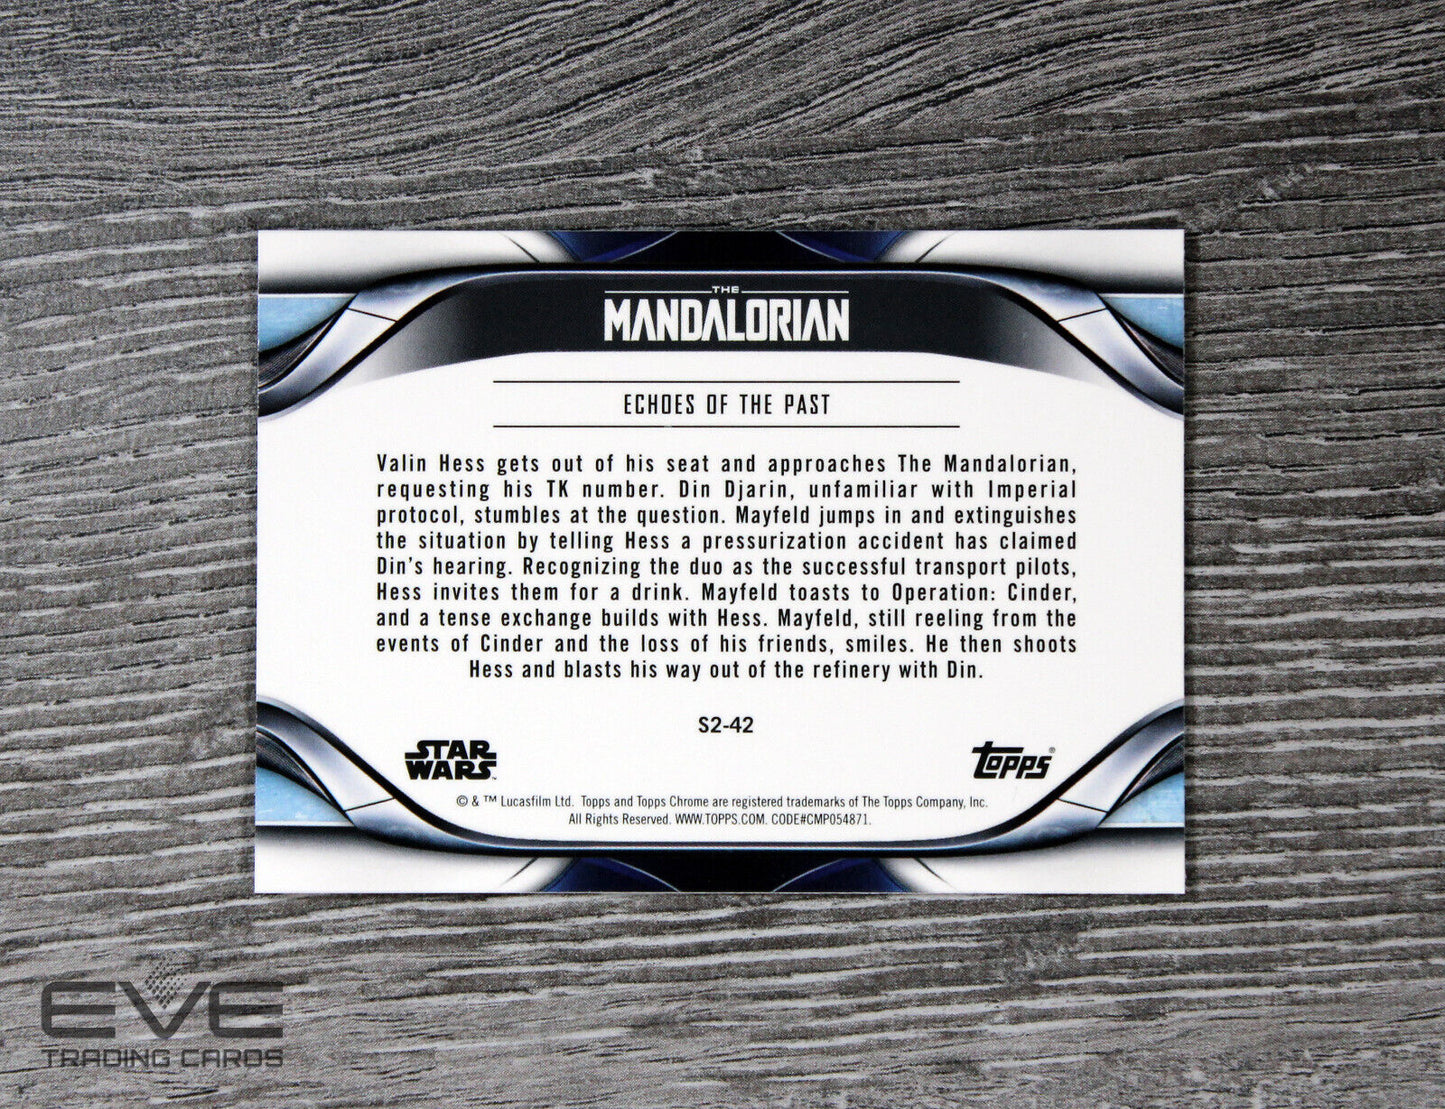 2022 Topps Chrome Star Wars The Mandalorian #S2-42 Echoes of the Past NM/M